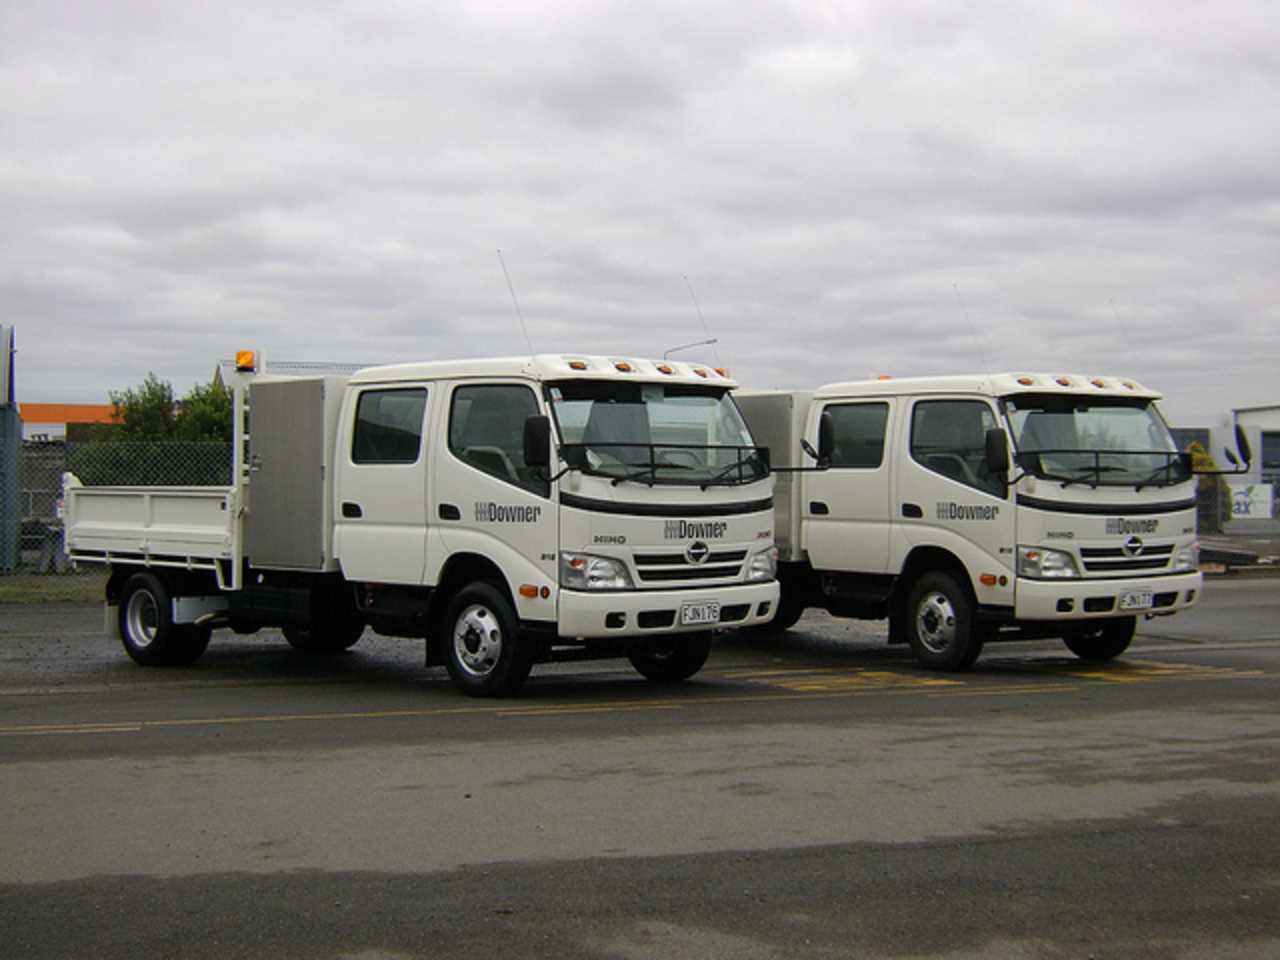 Hino 300 series crew cab tippers | Flickr - Photo Sharing!